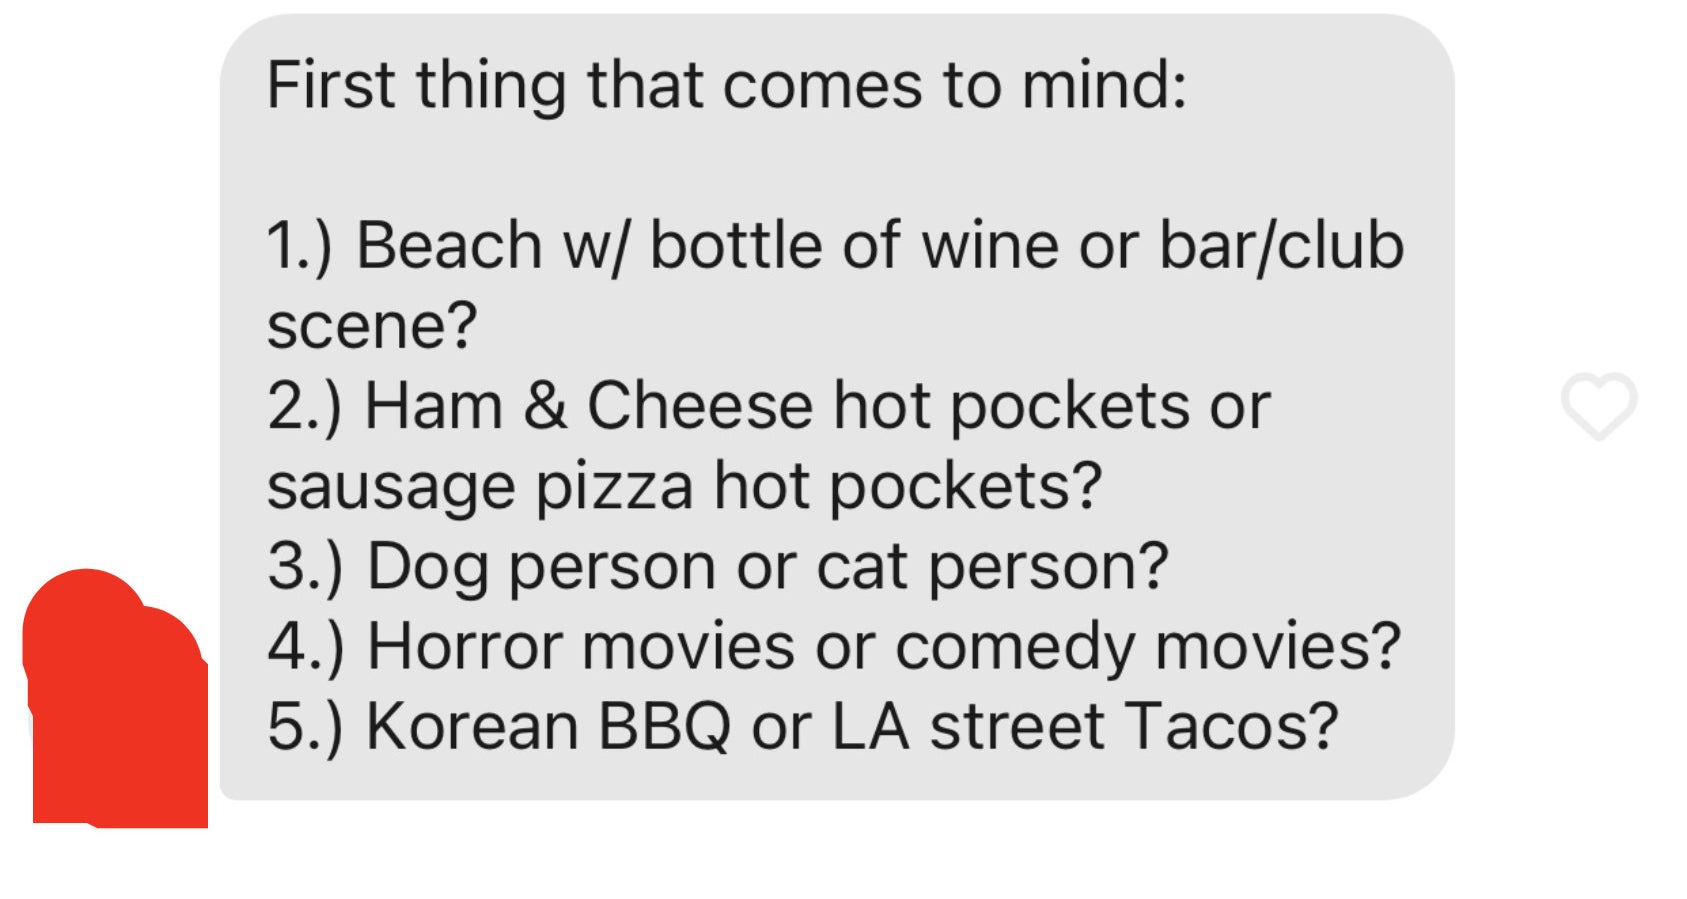 First thing that comes to mind: 1. Beach w/ bottle of wine or bar/club scene? 2. Ham &amp; Cheese hot pockets or sausage pizza hot pockets? 3. Dog person or cat person? 4. Horror movies or comedy movies? 5. Korean BBQ or LA street Tacos?